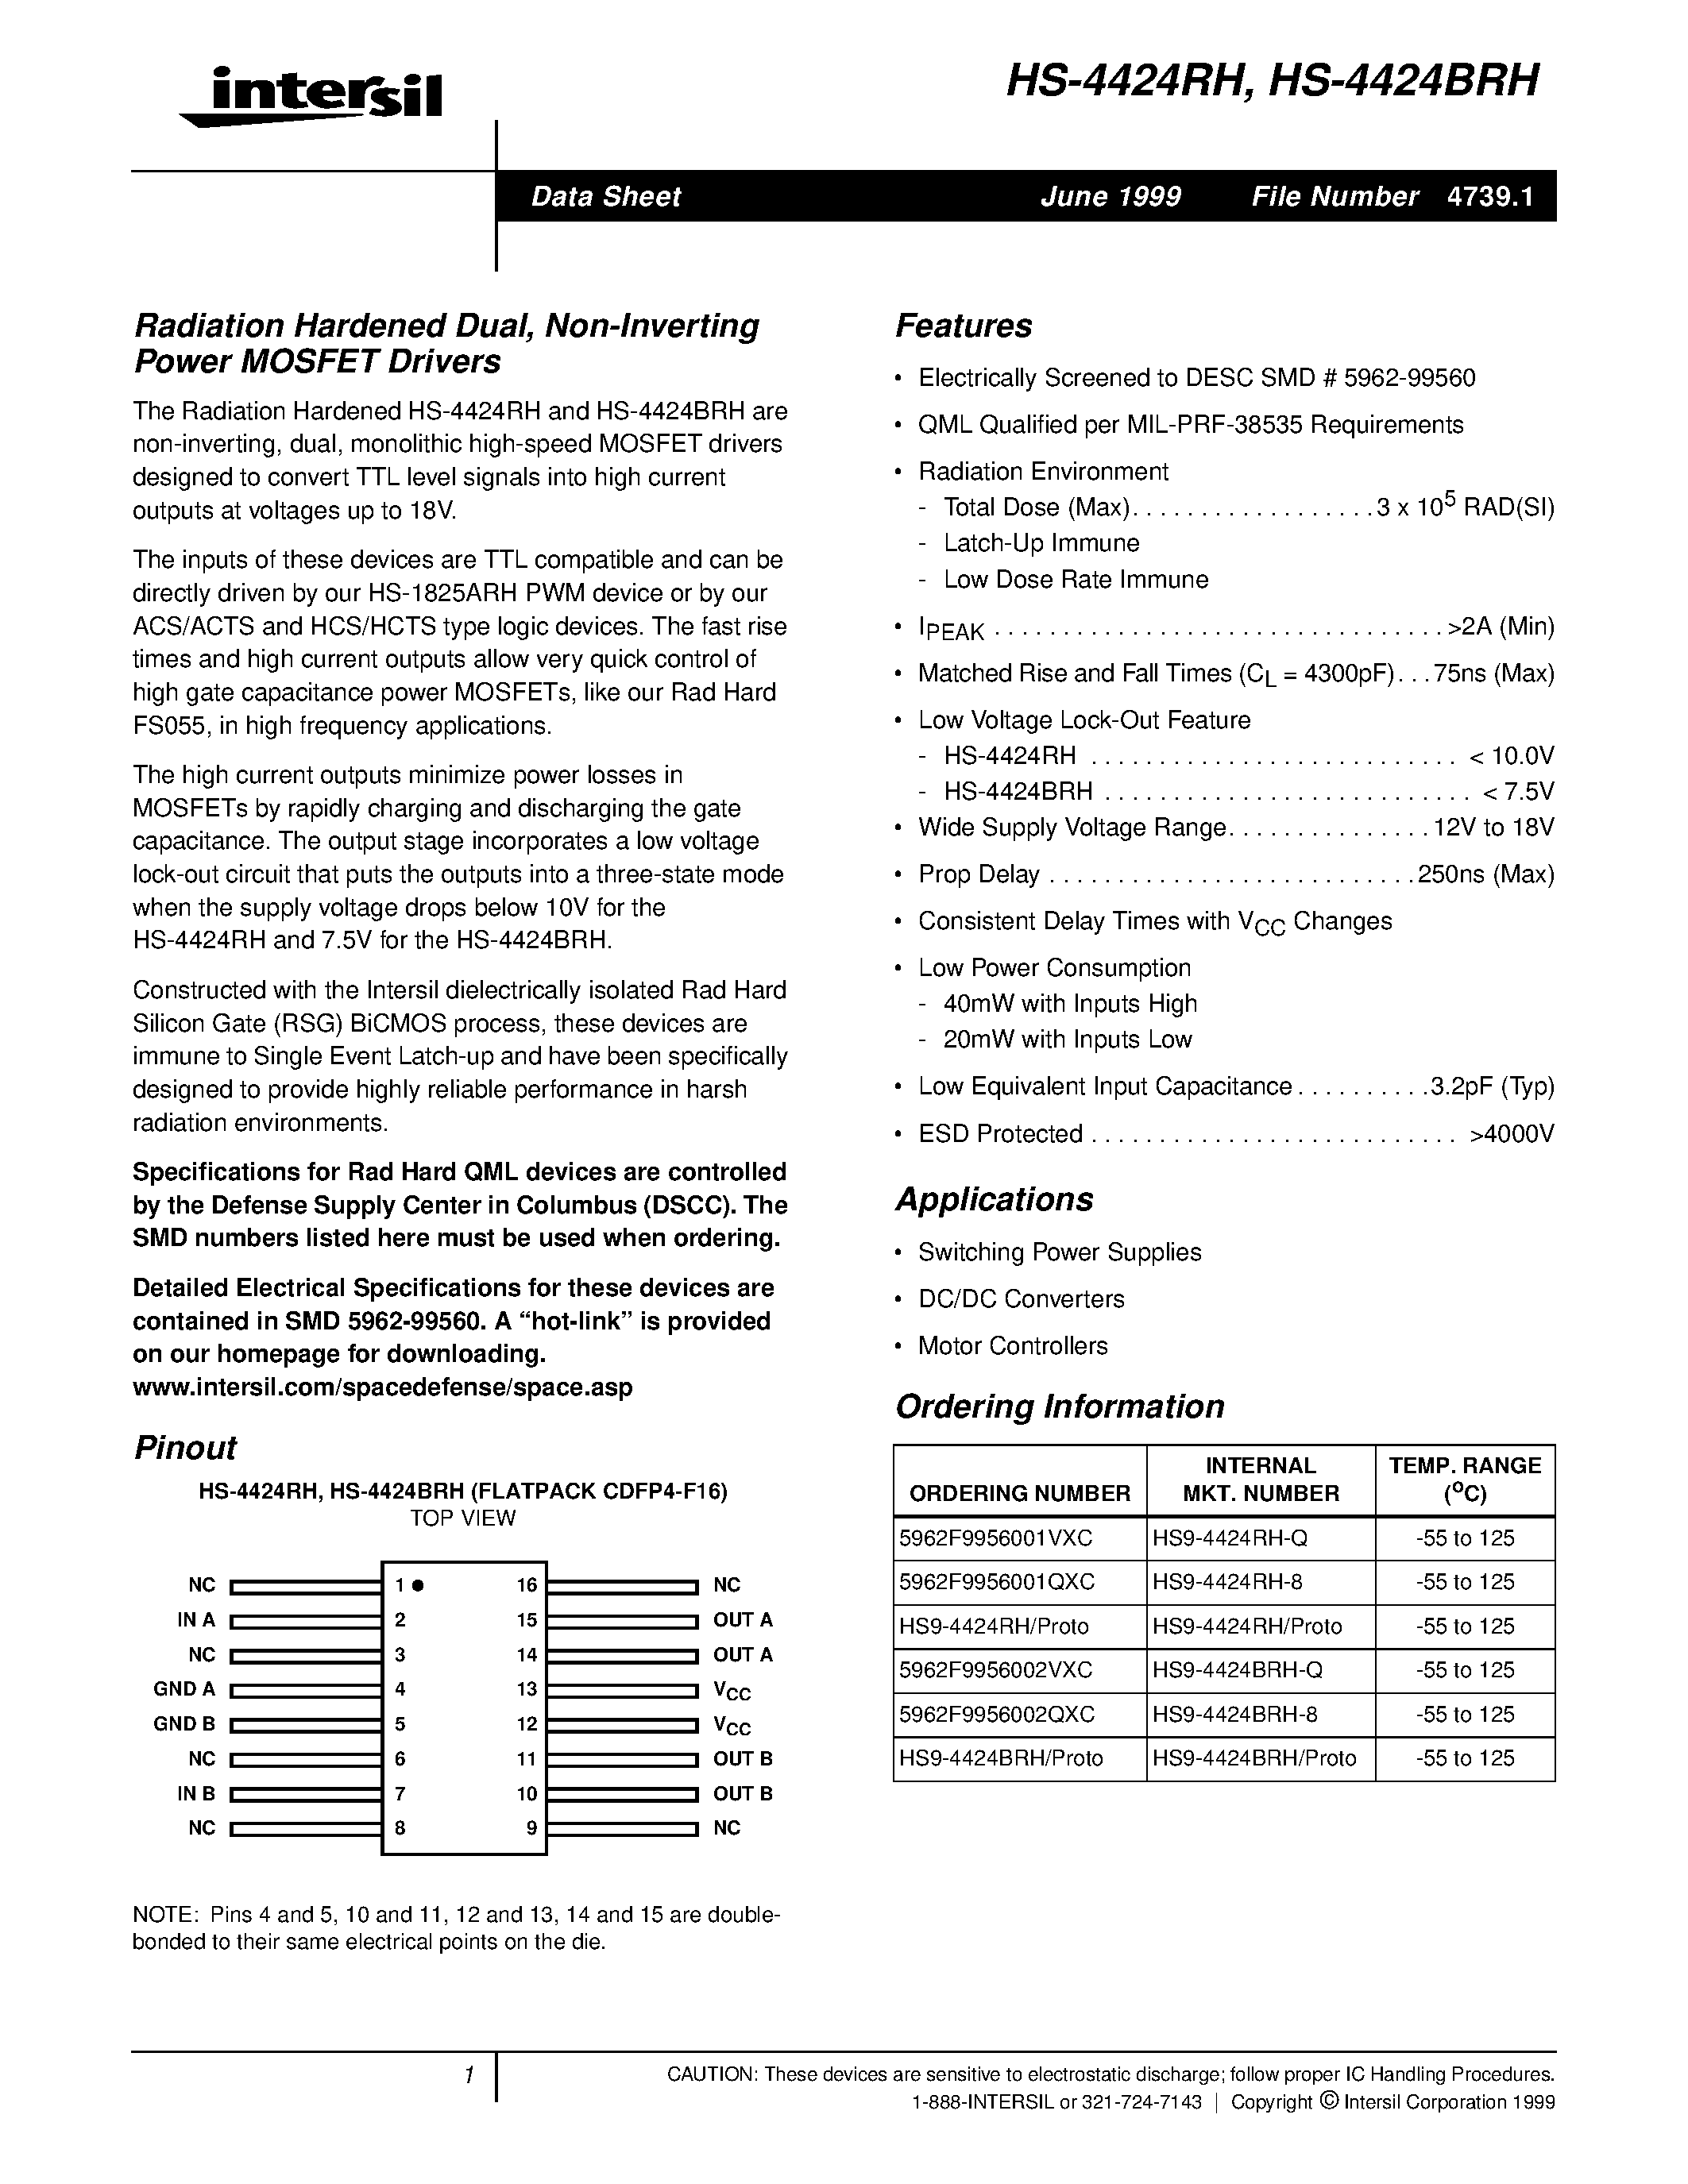 Datasheet HS9-4424RH-Q - Radiation Hardened Dual/ Non-Inverting Power MOSFET Drivers page 1